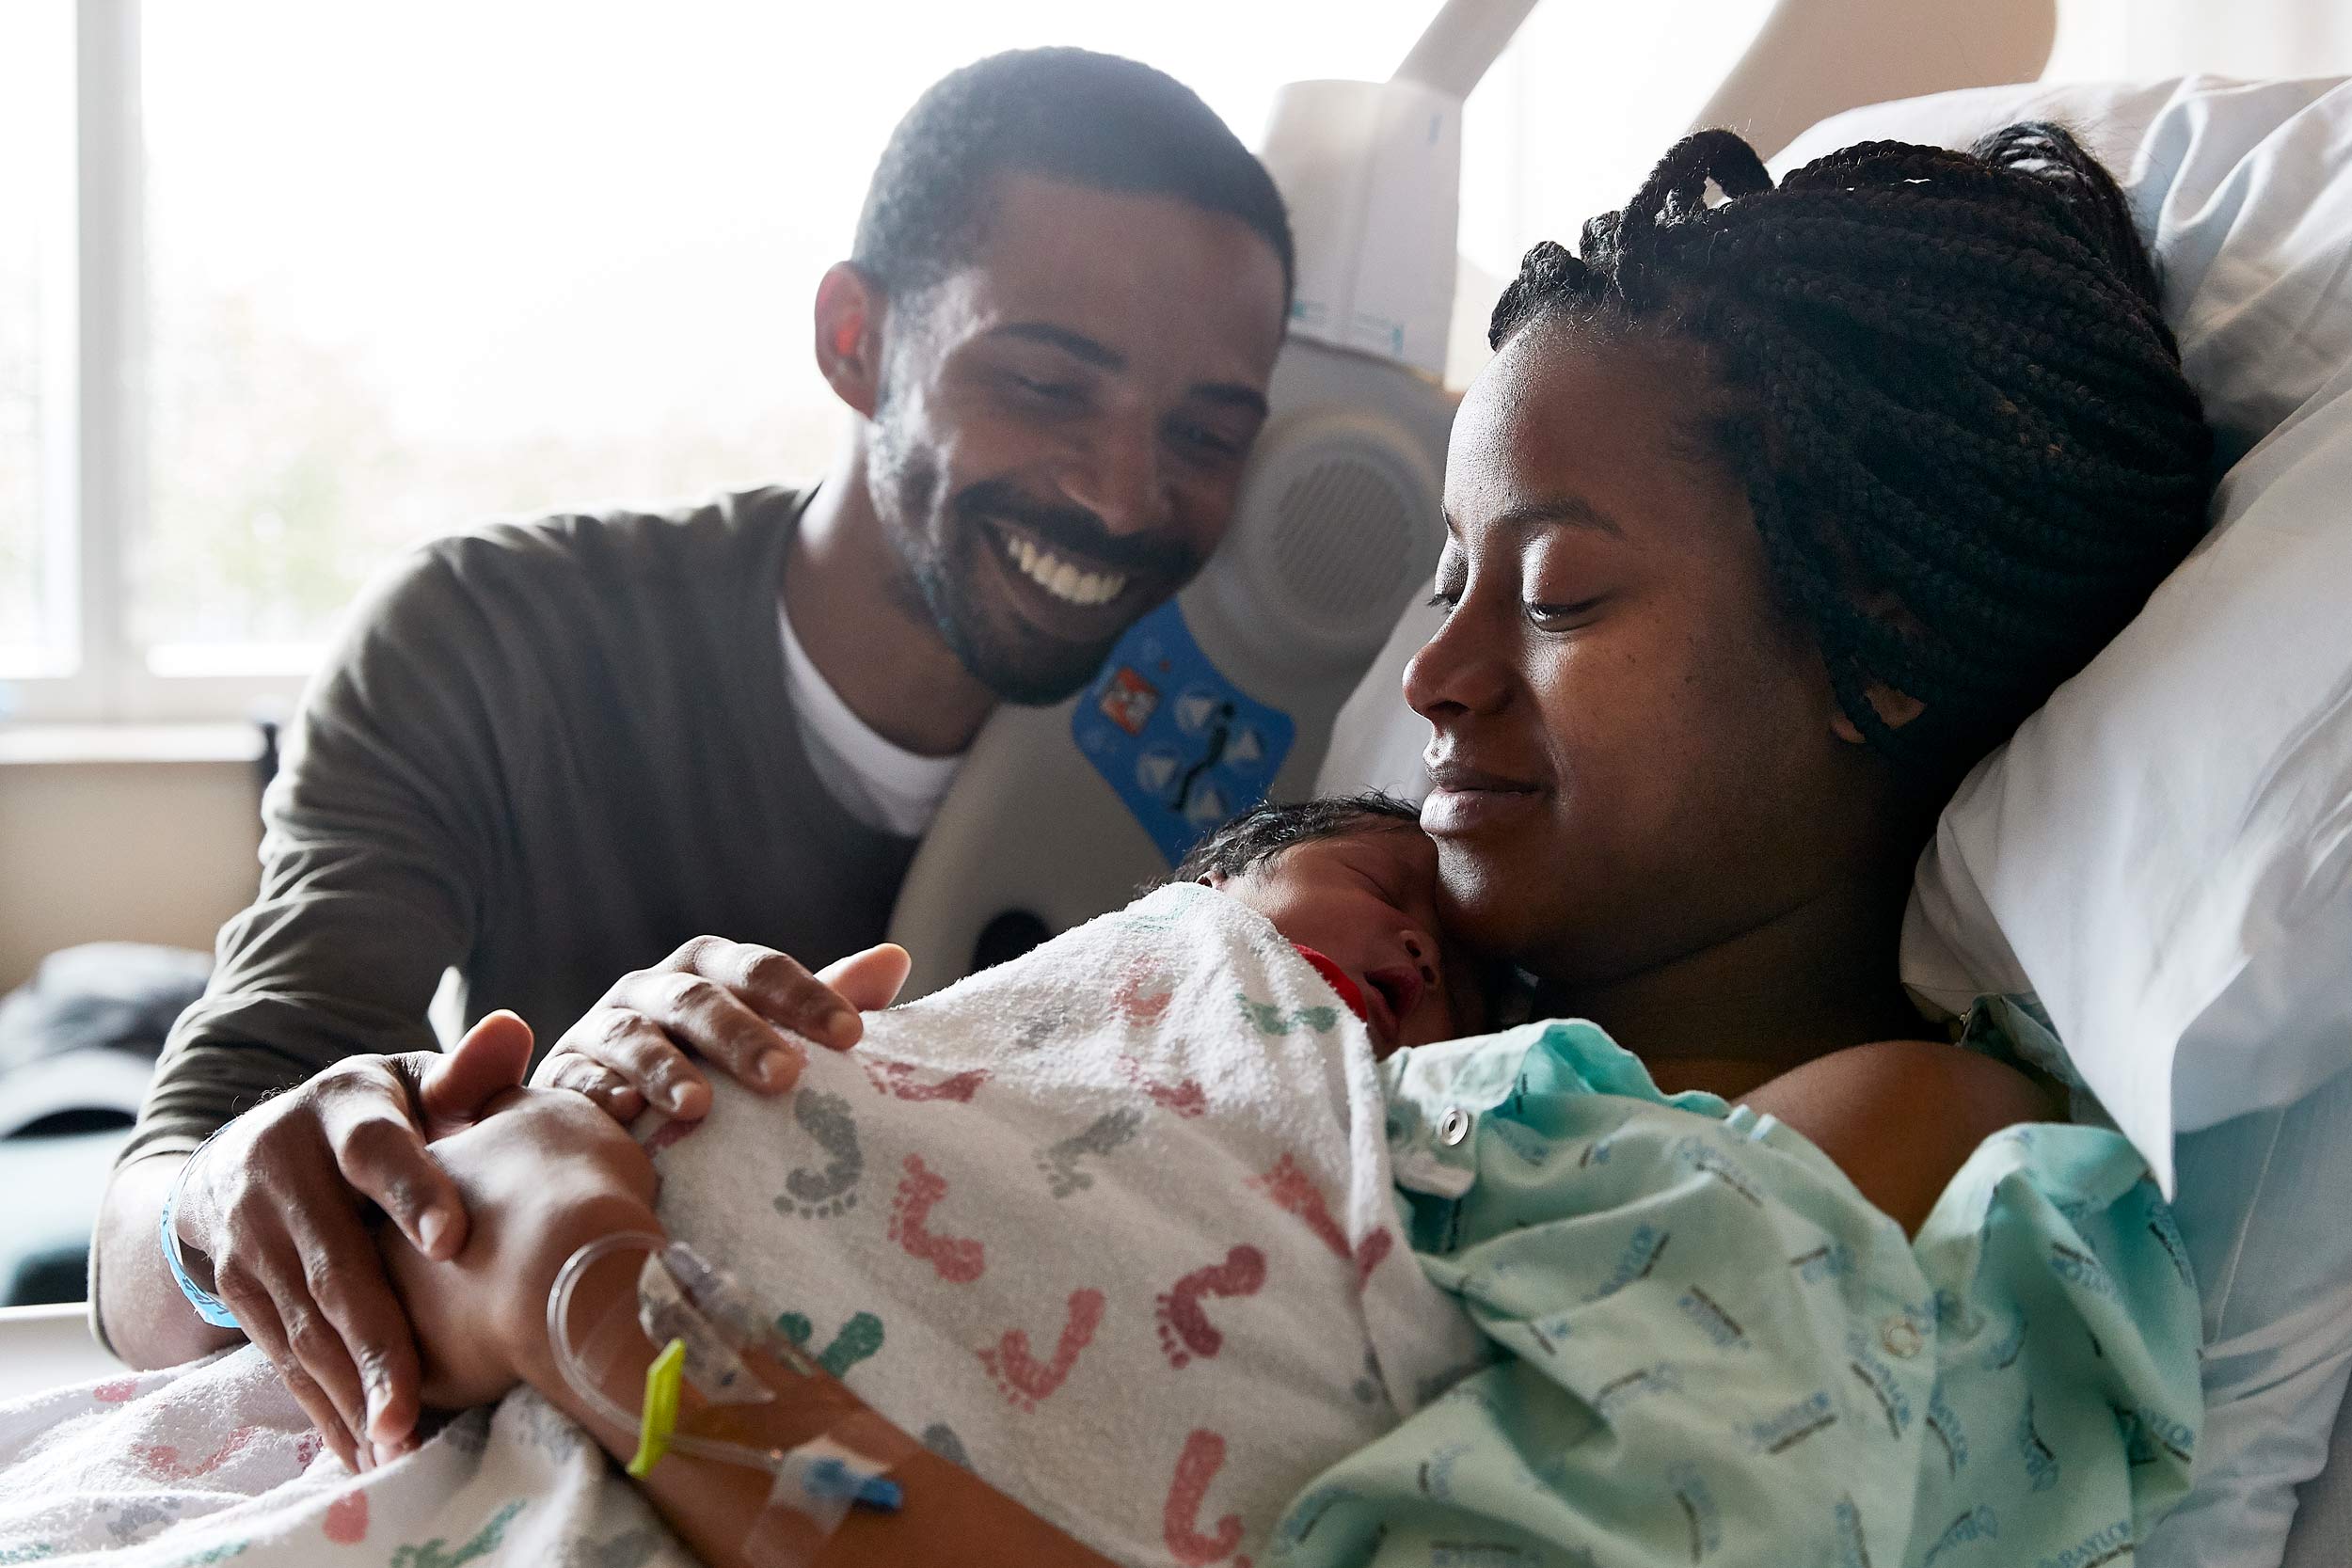 Indoor healthcare photograph of a new family of three in hospital room